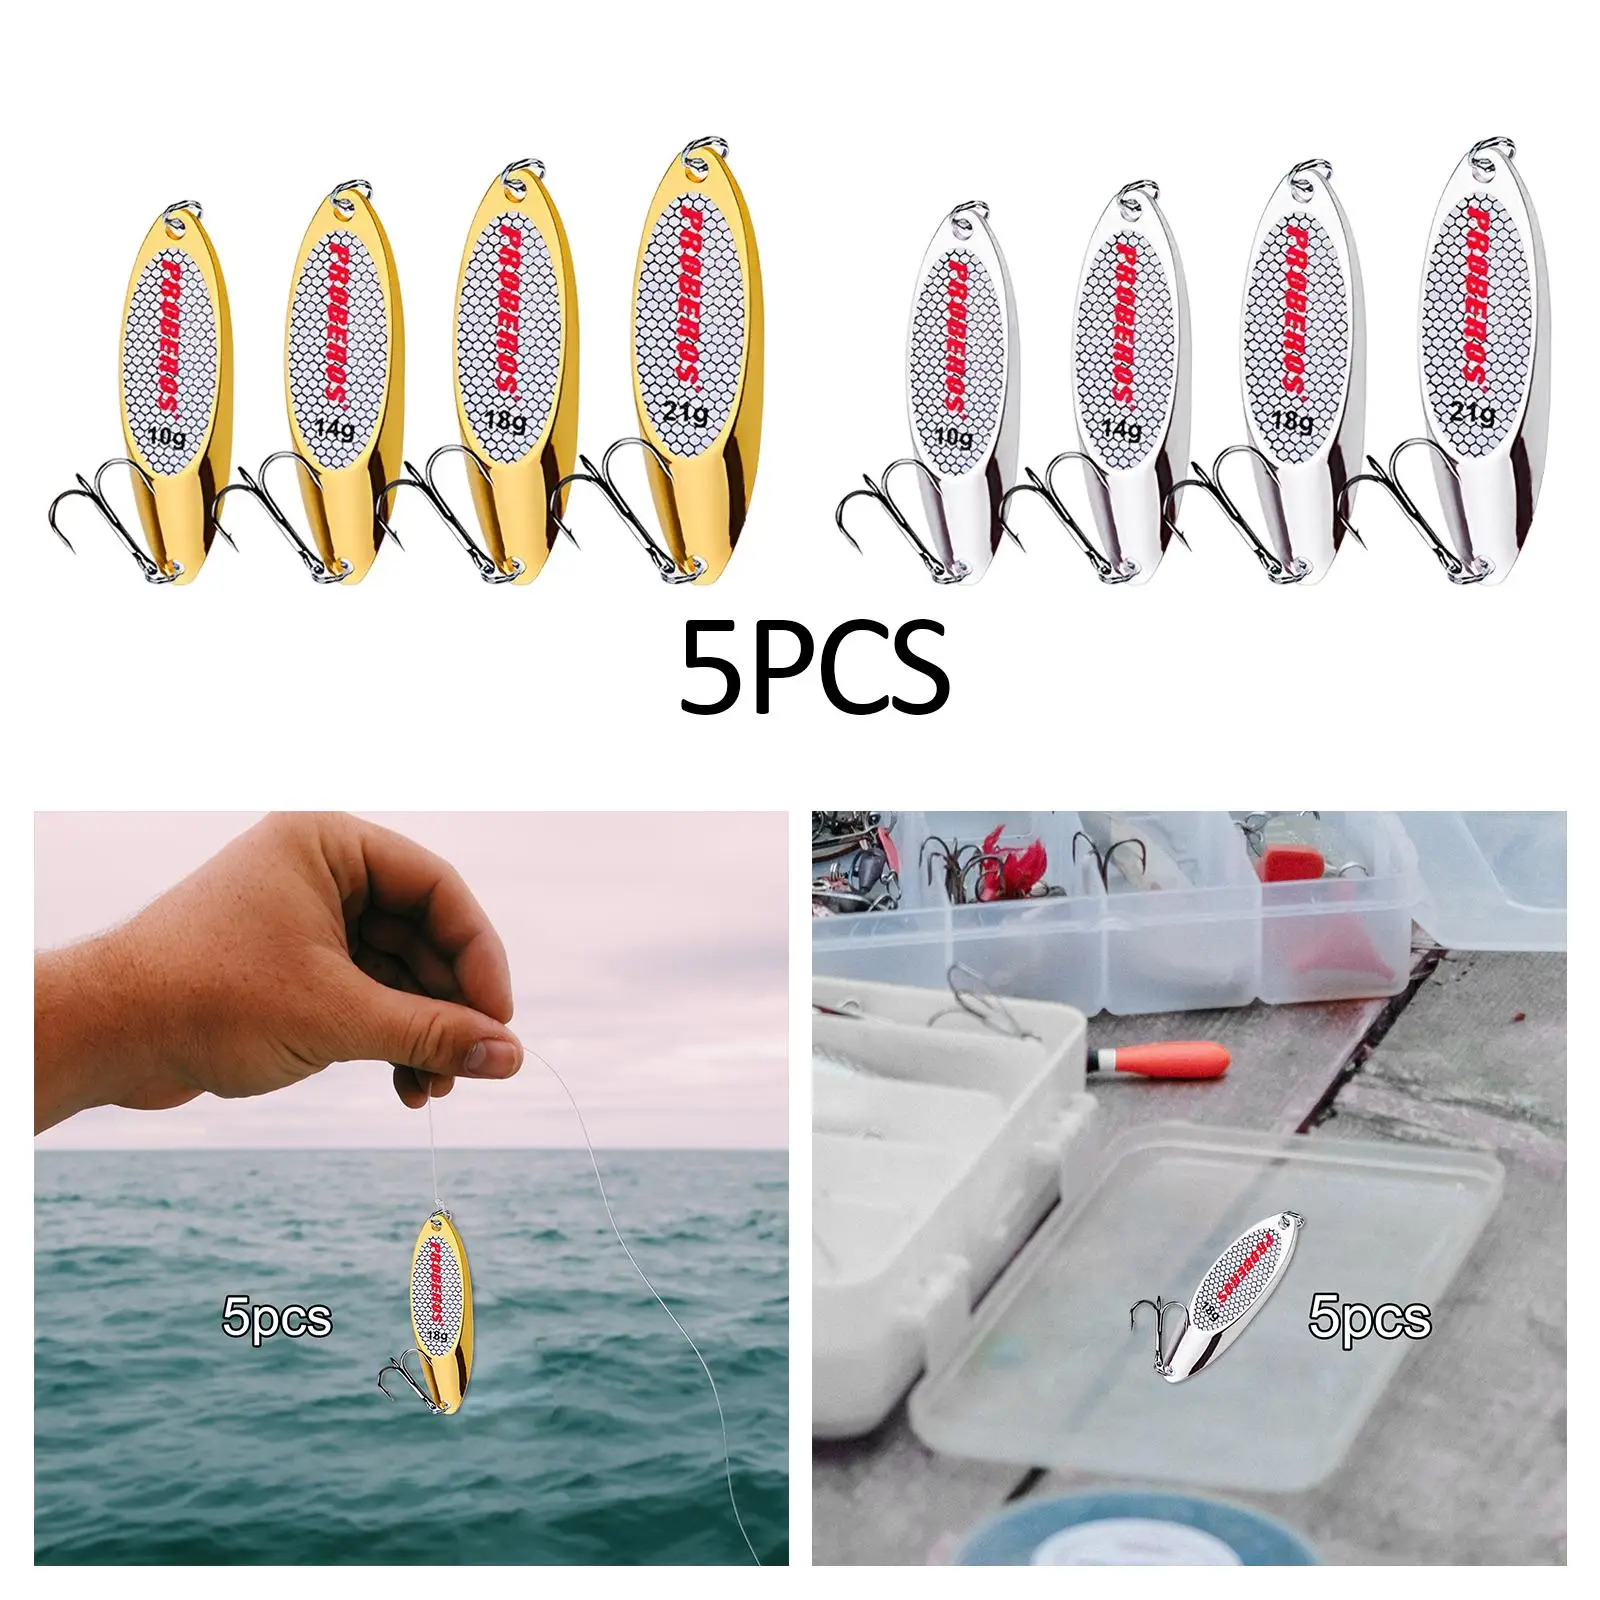 5 Pieces Fishing Spoons Lures Hooks Saltwater Spinnerbaits Bass Baits and Lures for Salmon Catfish Pike Redfish Fishing Supplies